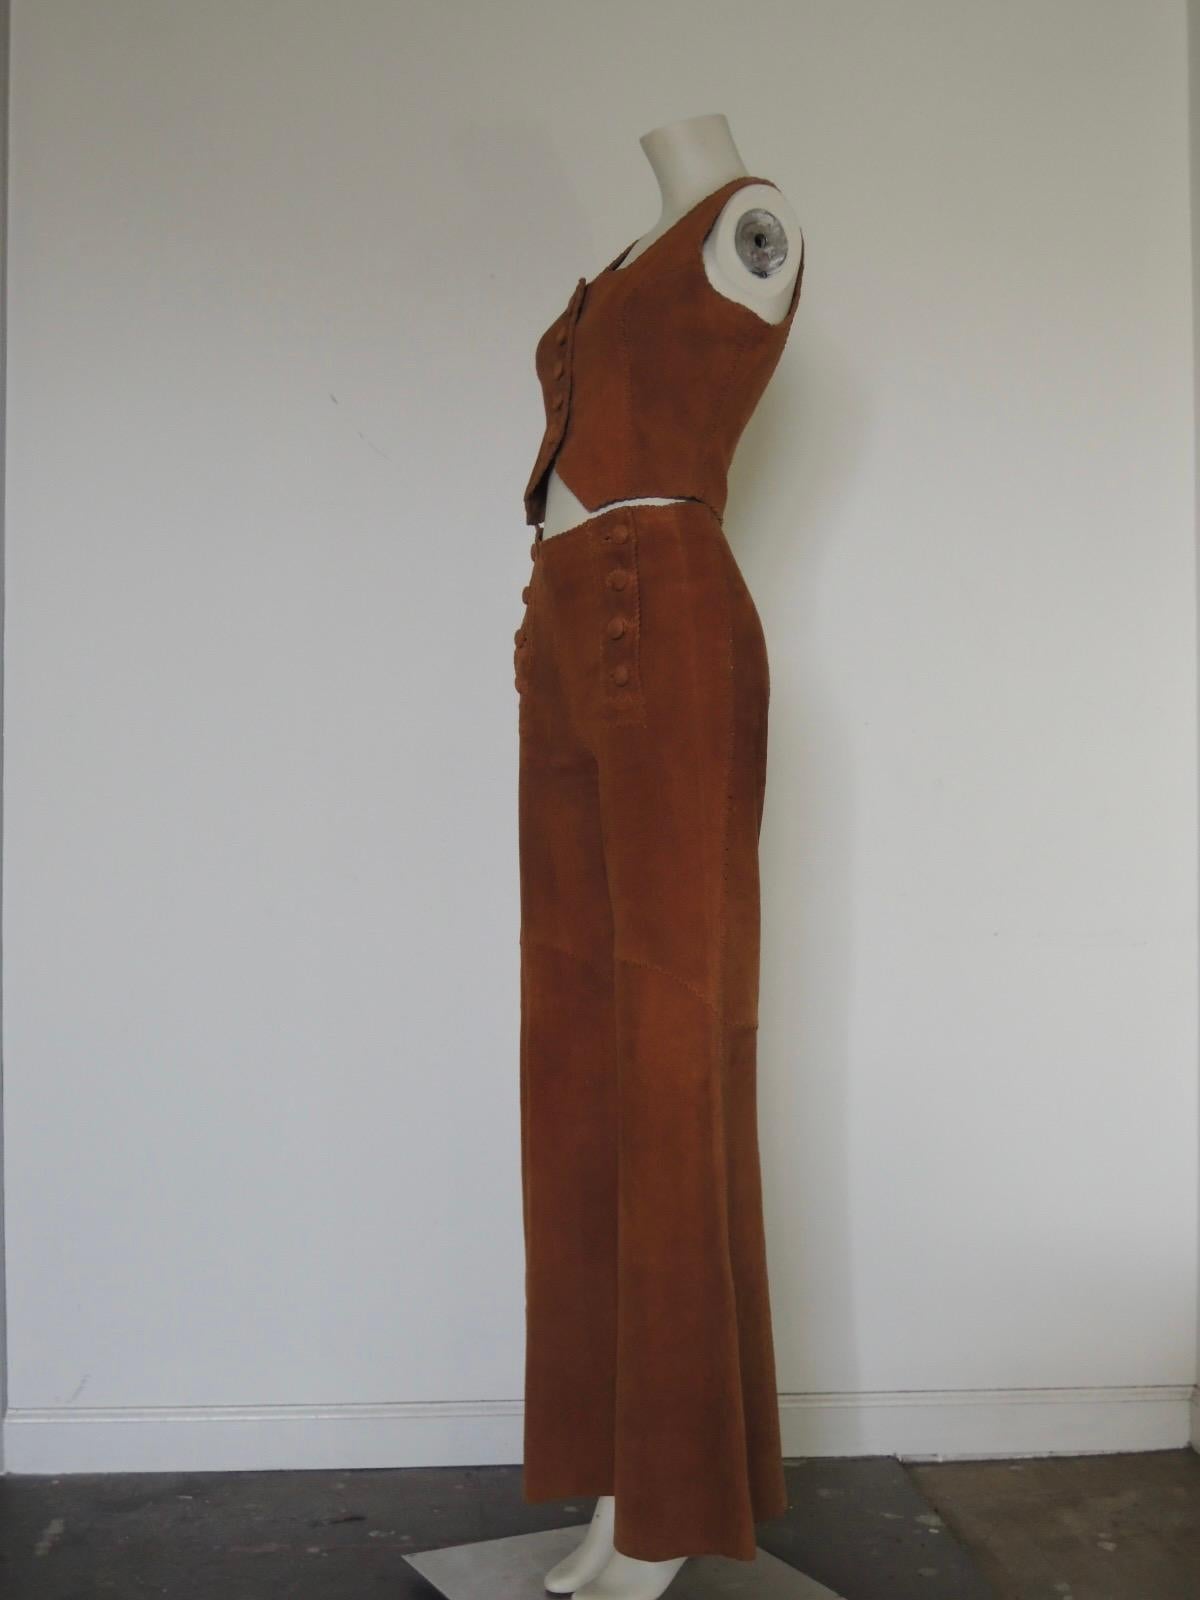 This is a vintage North Beach Leather suede set of pants and vest. Vintage 1970s handmade North Beach Leather suede leather pants in a sailor-pant style. Whipstitch construction, 8-button front  A hippie crop vest completes the set.

These are in